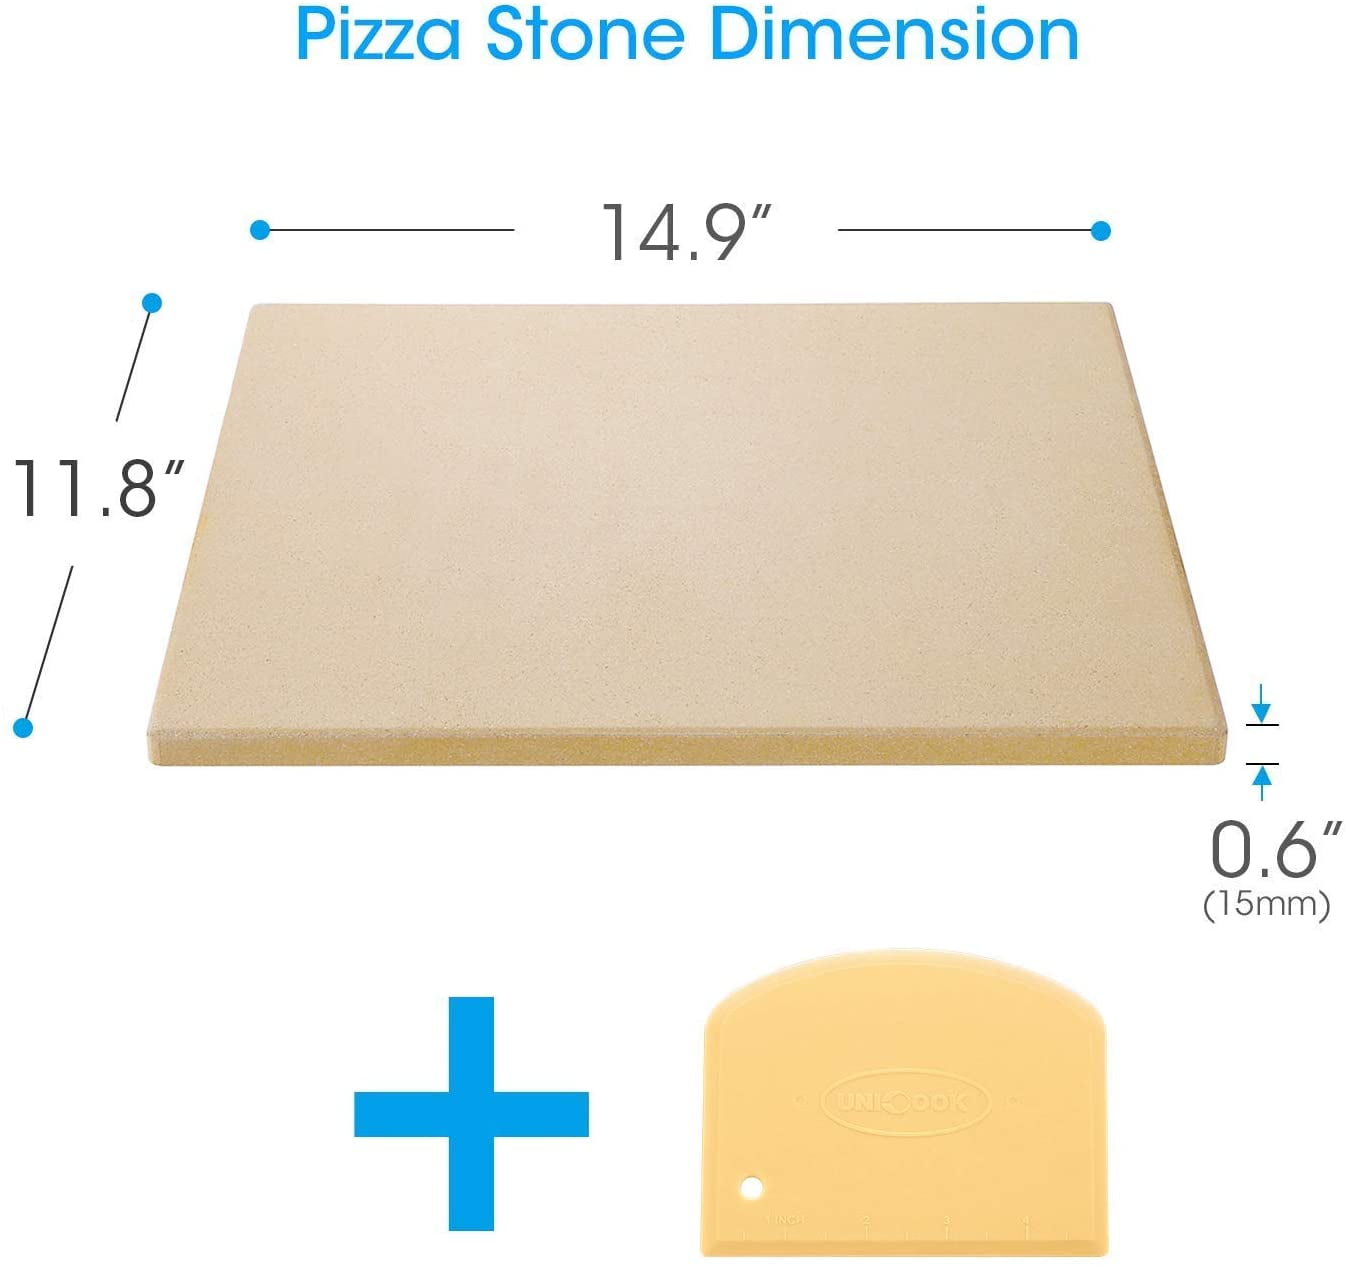 Rectangular Large Bread and Outdoor Grilling 15x16 Best for Crispy Crust Pizza with Recipes E-Book Vescoware Pizza Stone for Oven Baking Stone for BBQ & Grill with High Heat Retention 